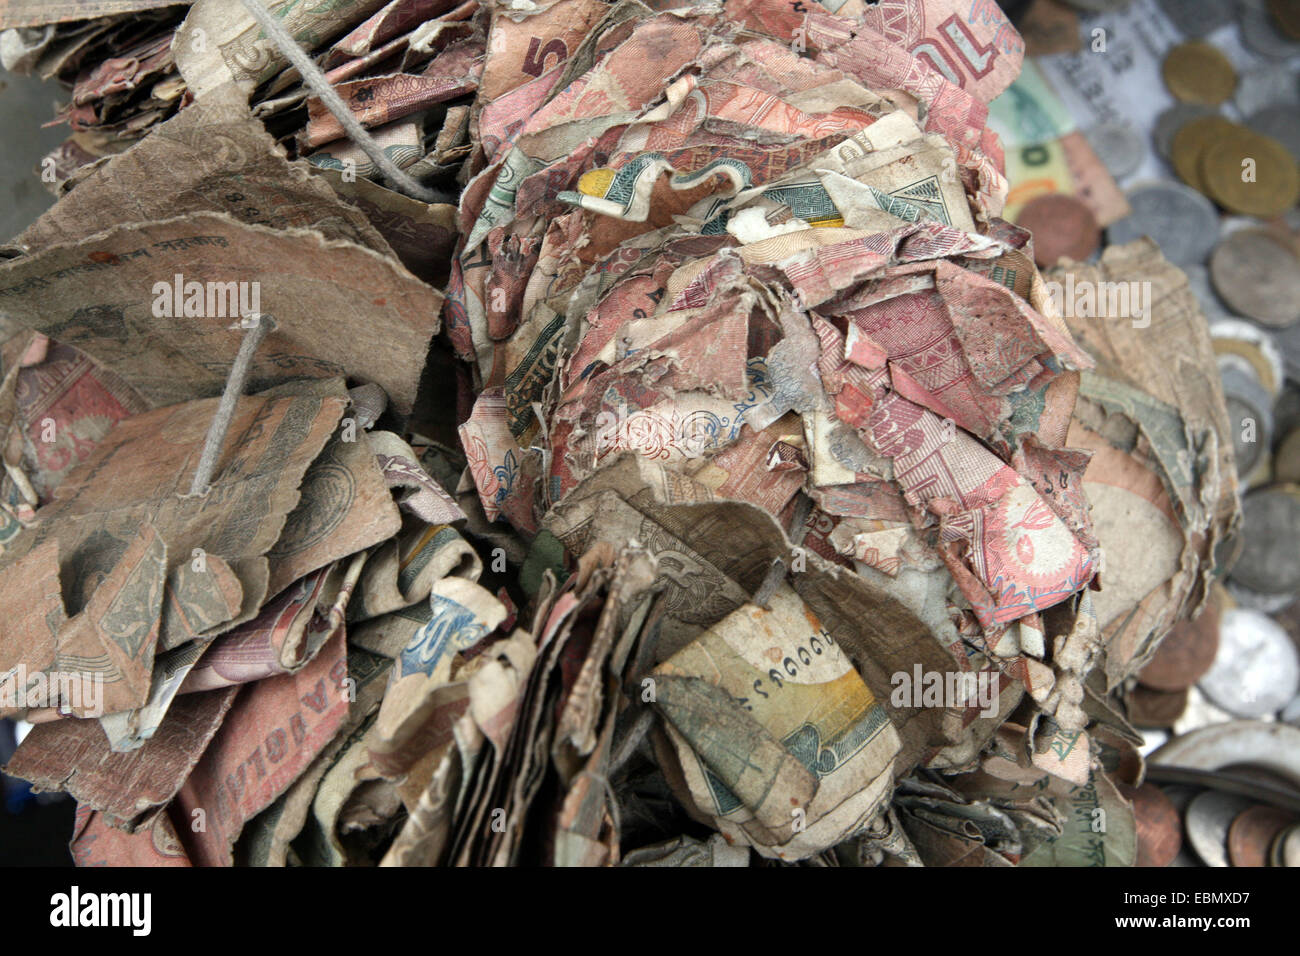 Dhaka .Bangladeshi  old, dirty and unusable bills at Gulistan area in dhaka. Customers can buy/exchange their old bills from them in return of new notes. Stock Photo